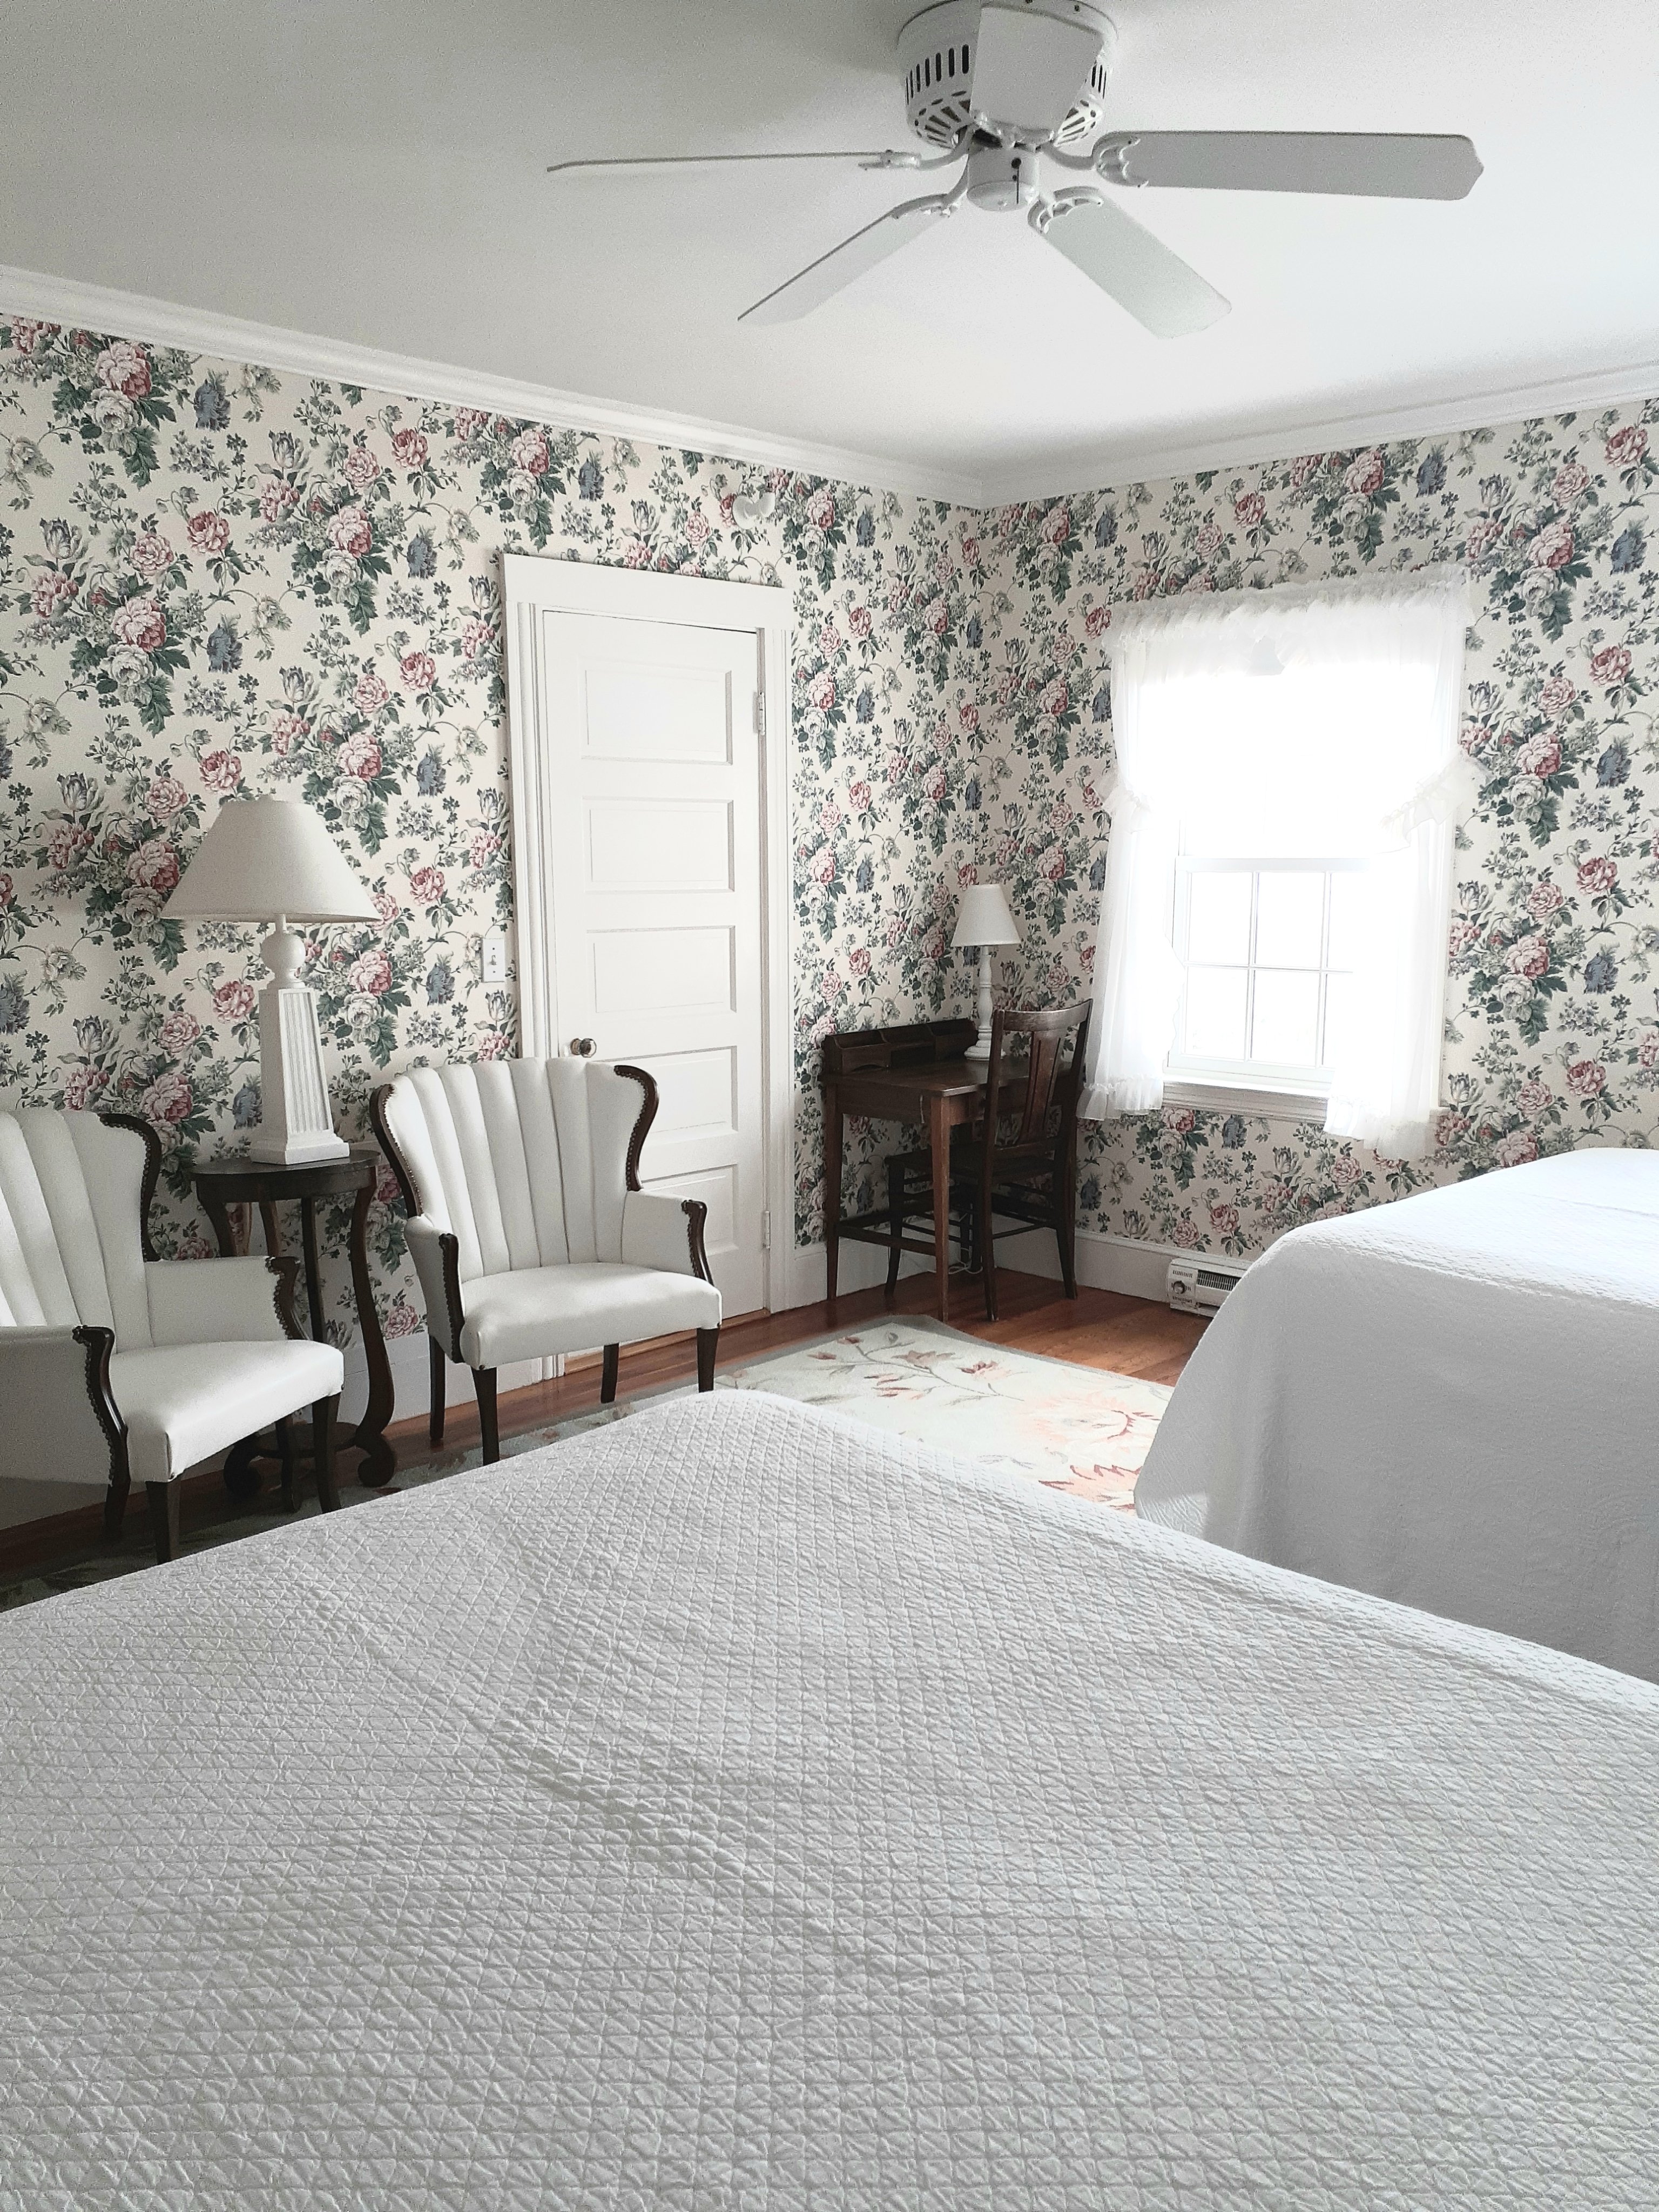 Large room with two queen beds and great windows.